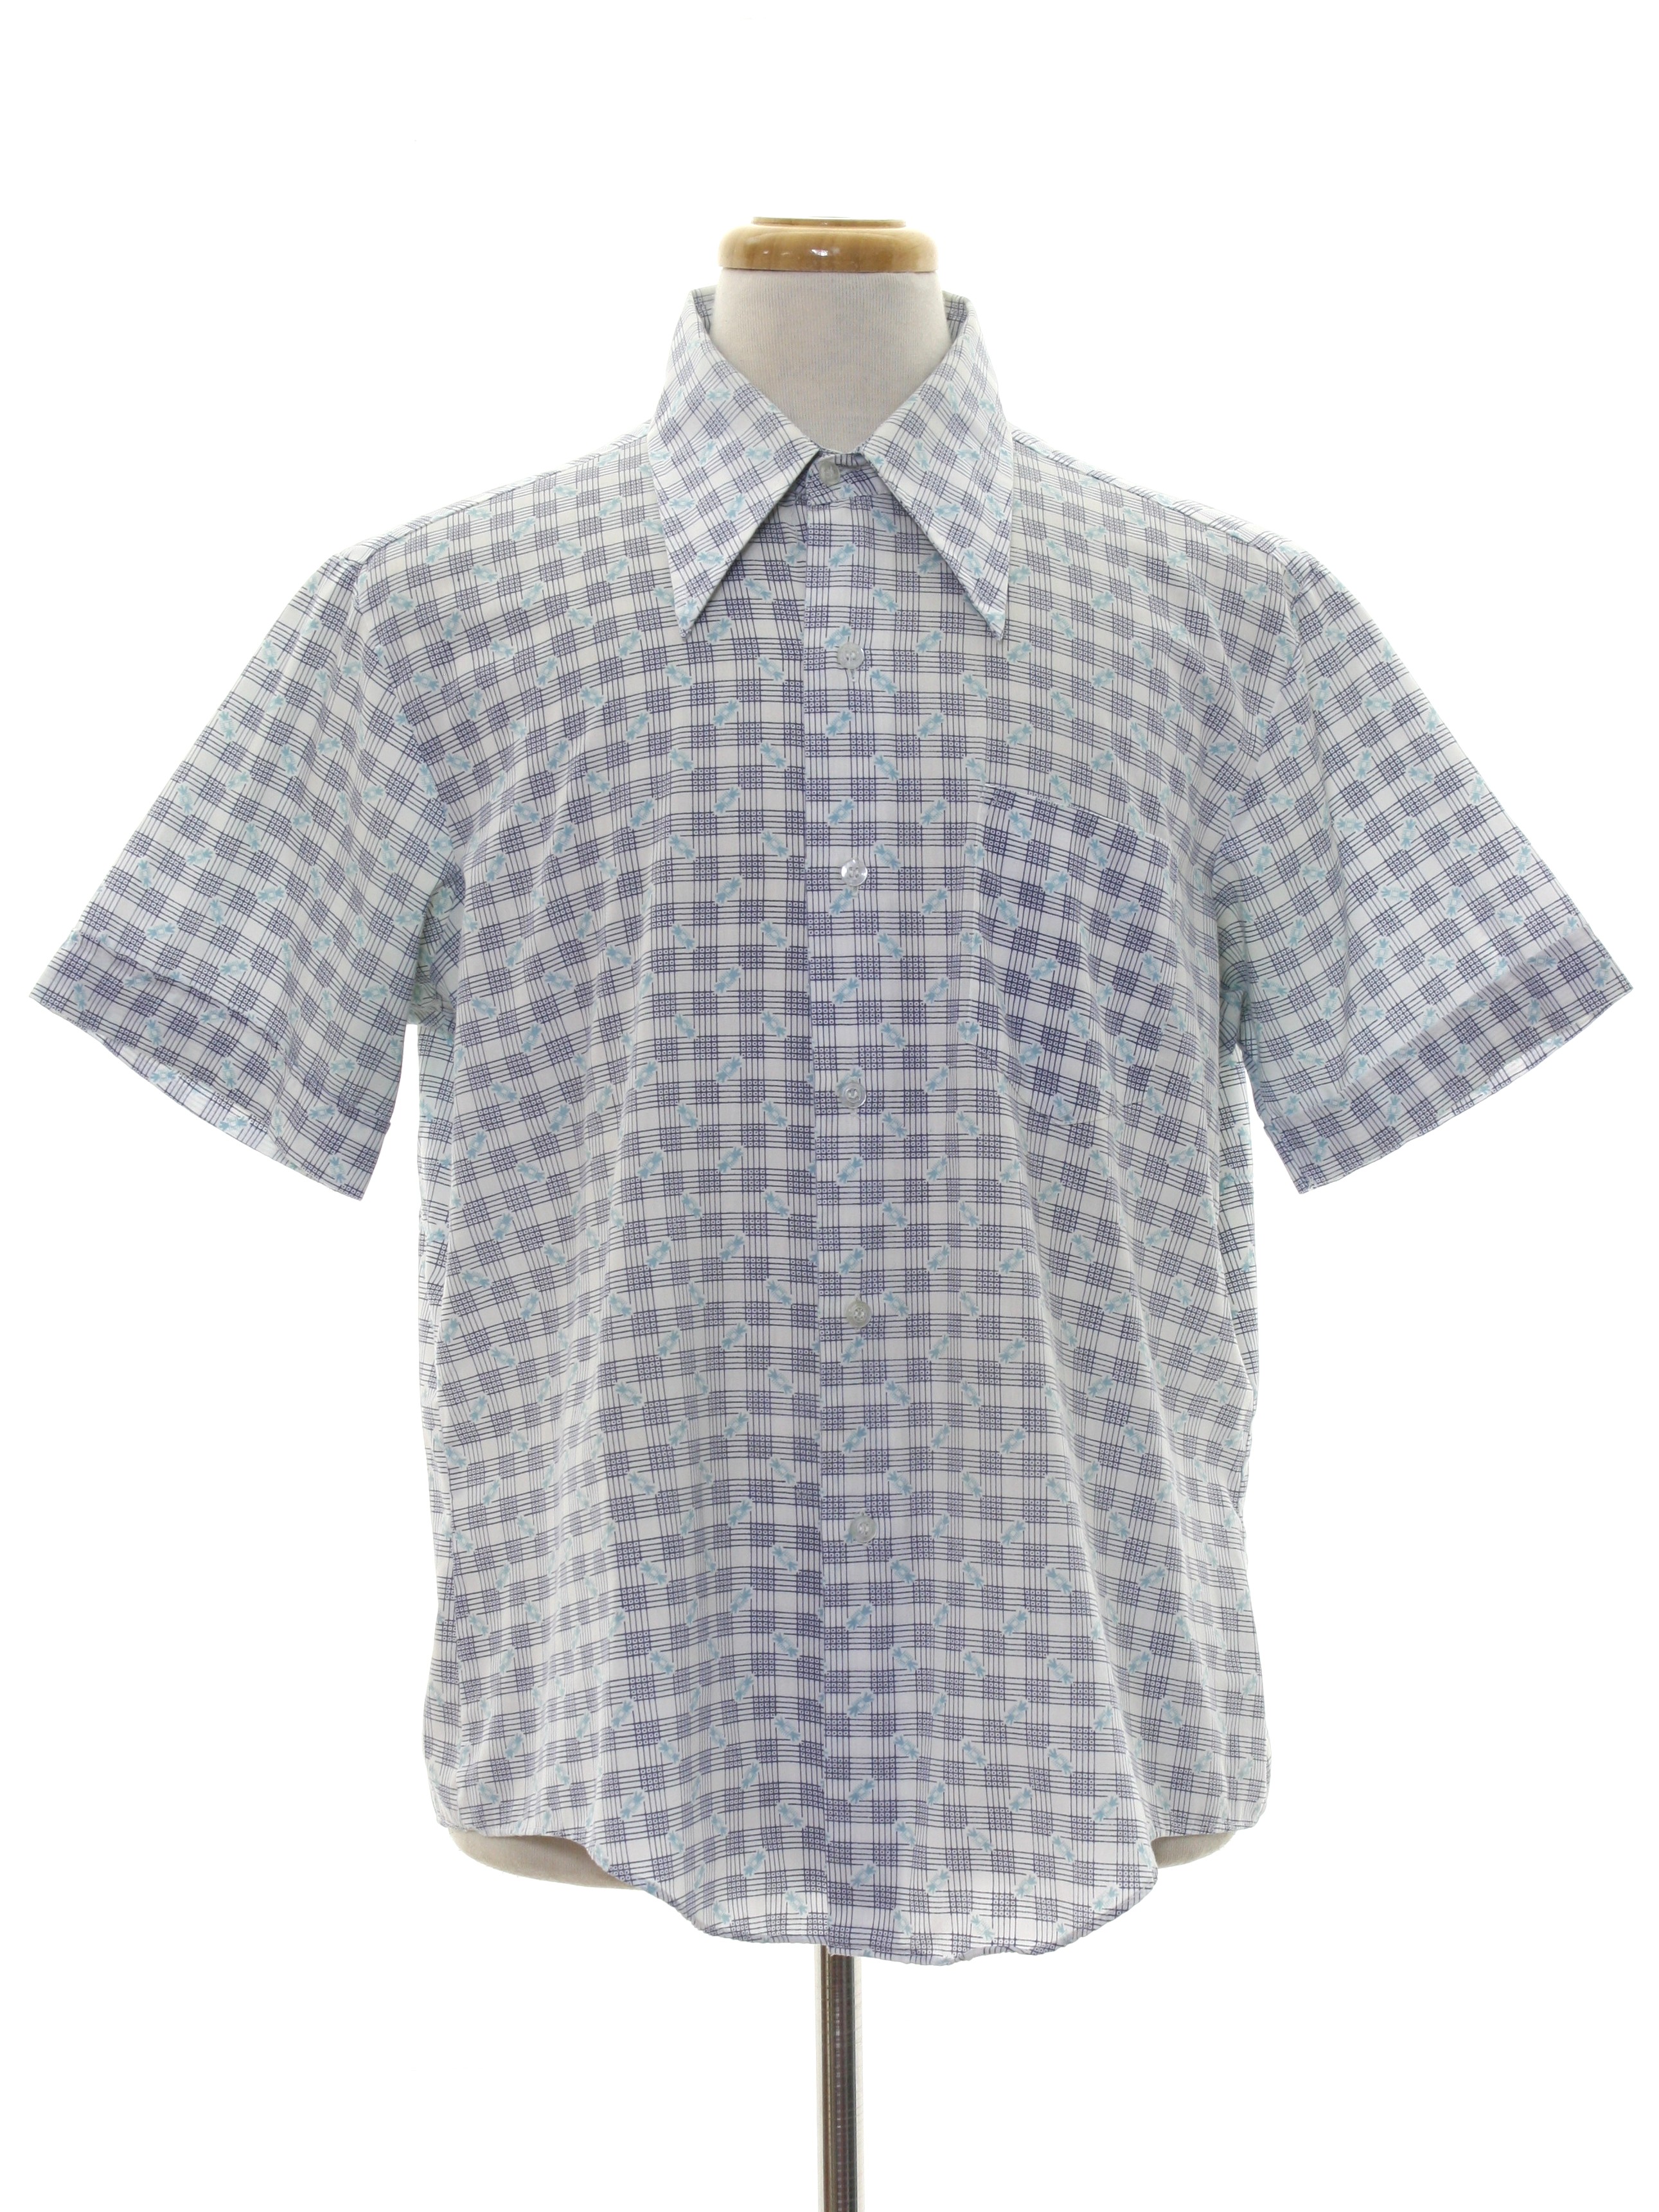 Retro Seventies Shirt: Early 70s -K-Mart- Mens blue, blended cotton ...